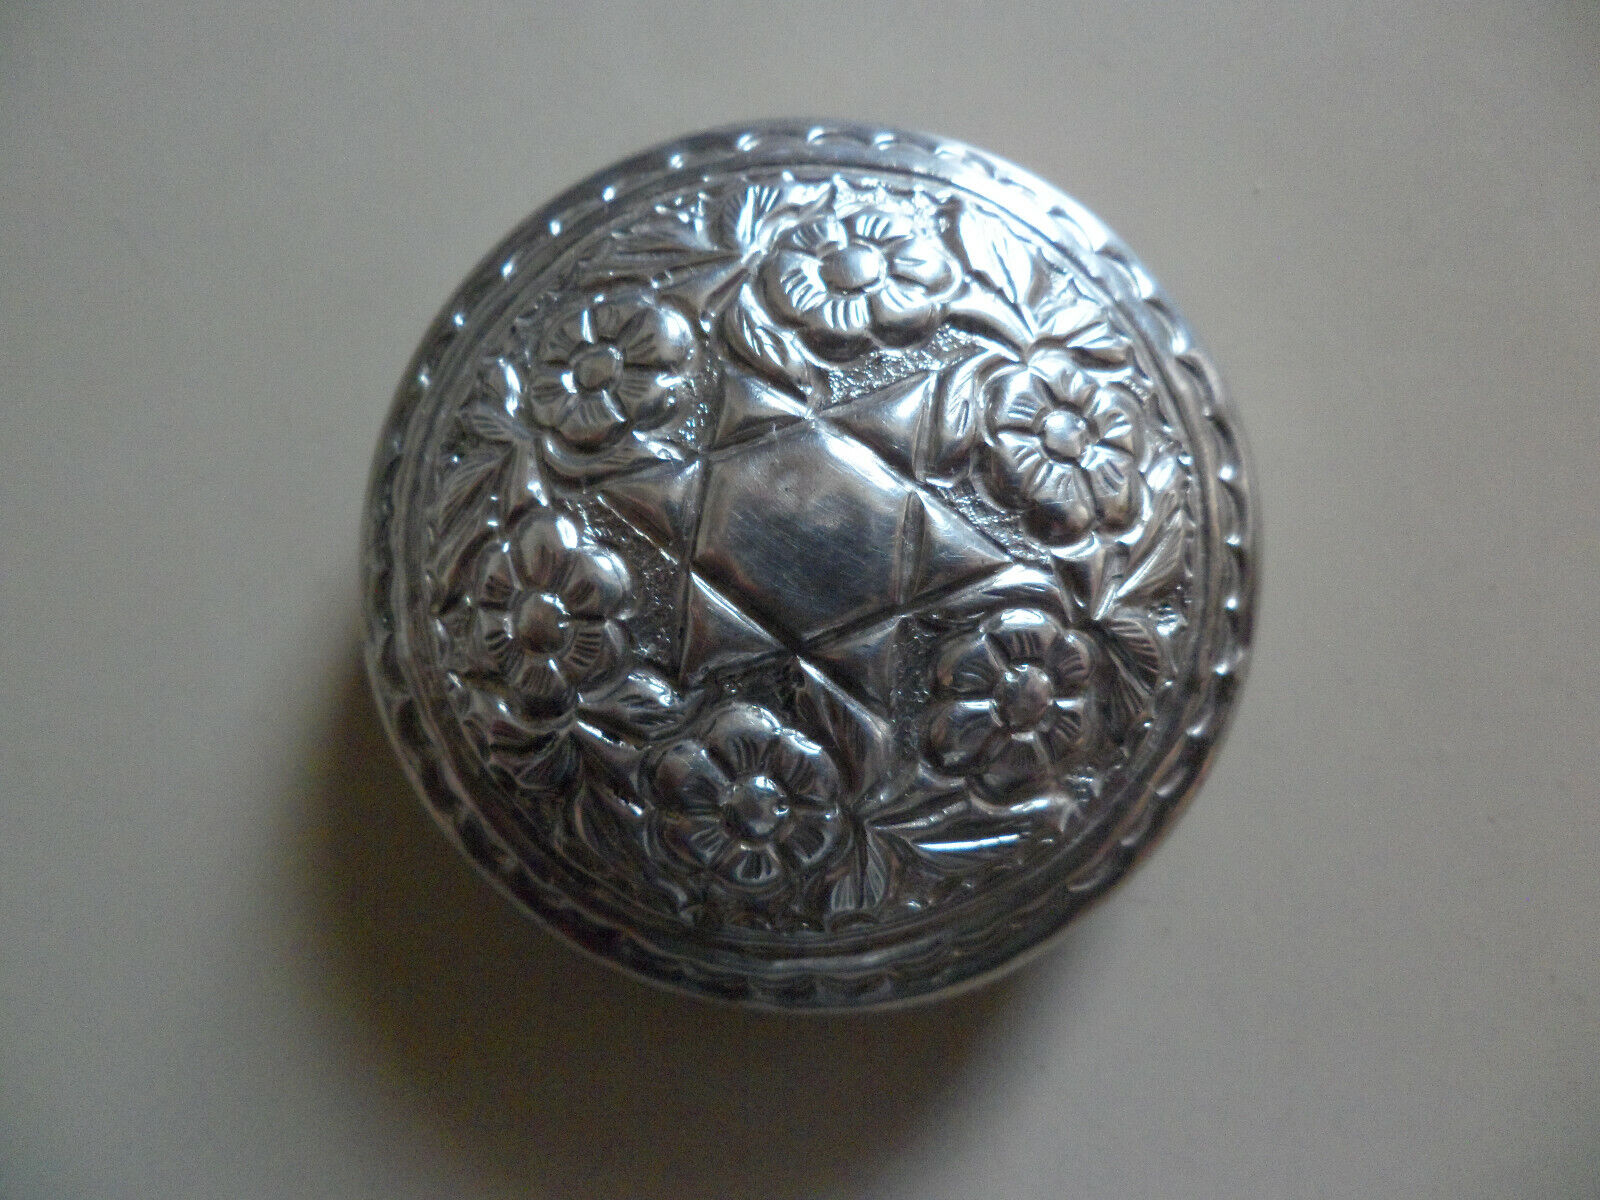 SILVER 900 ROUND SNUFF BOX OR PILL CASE FLOWERS LEAVES & STAR VE